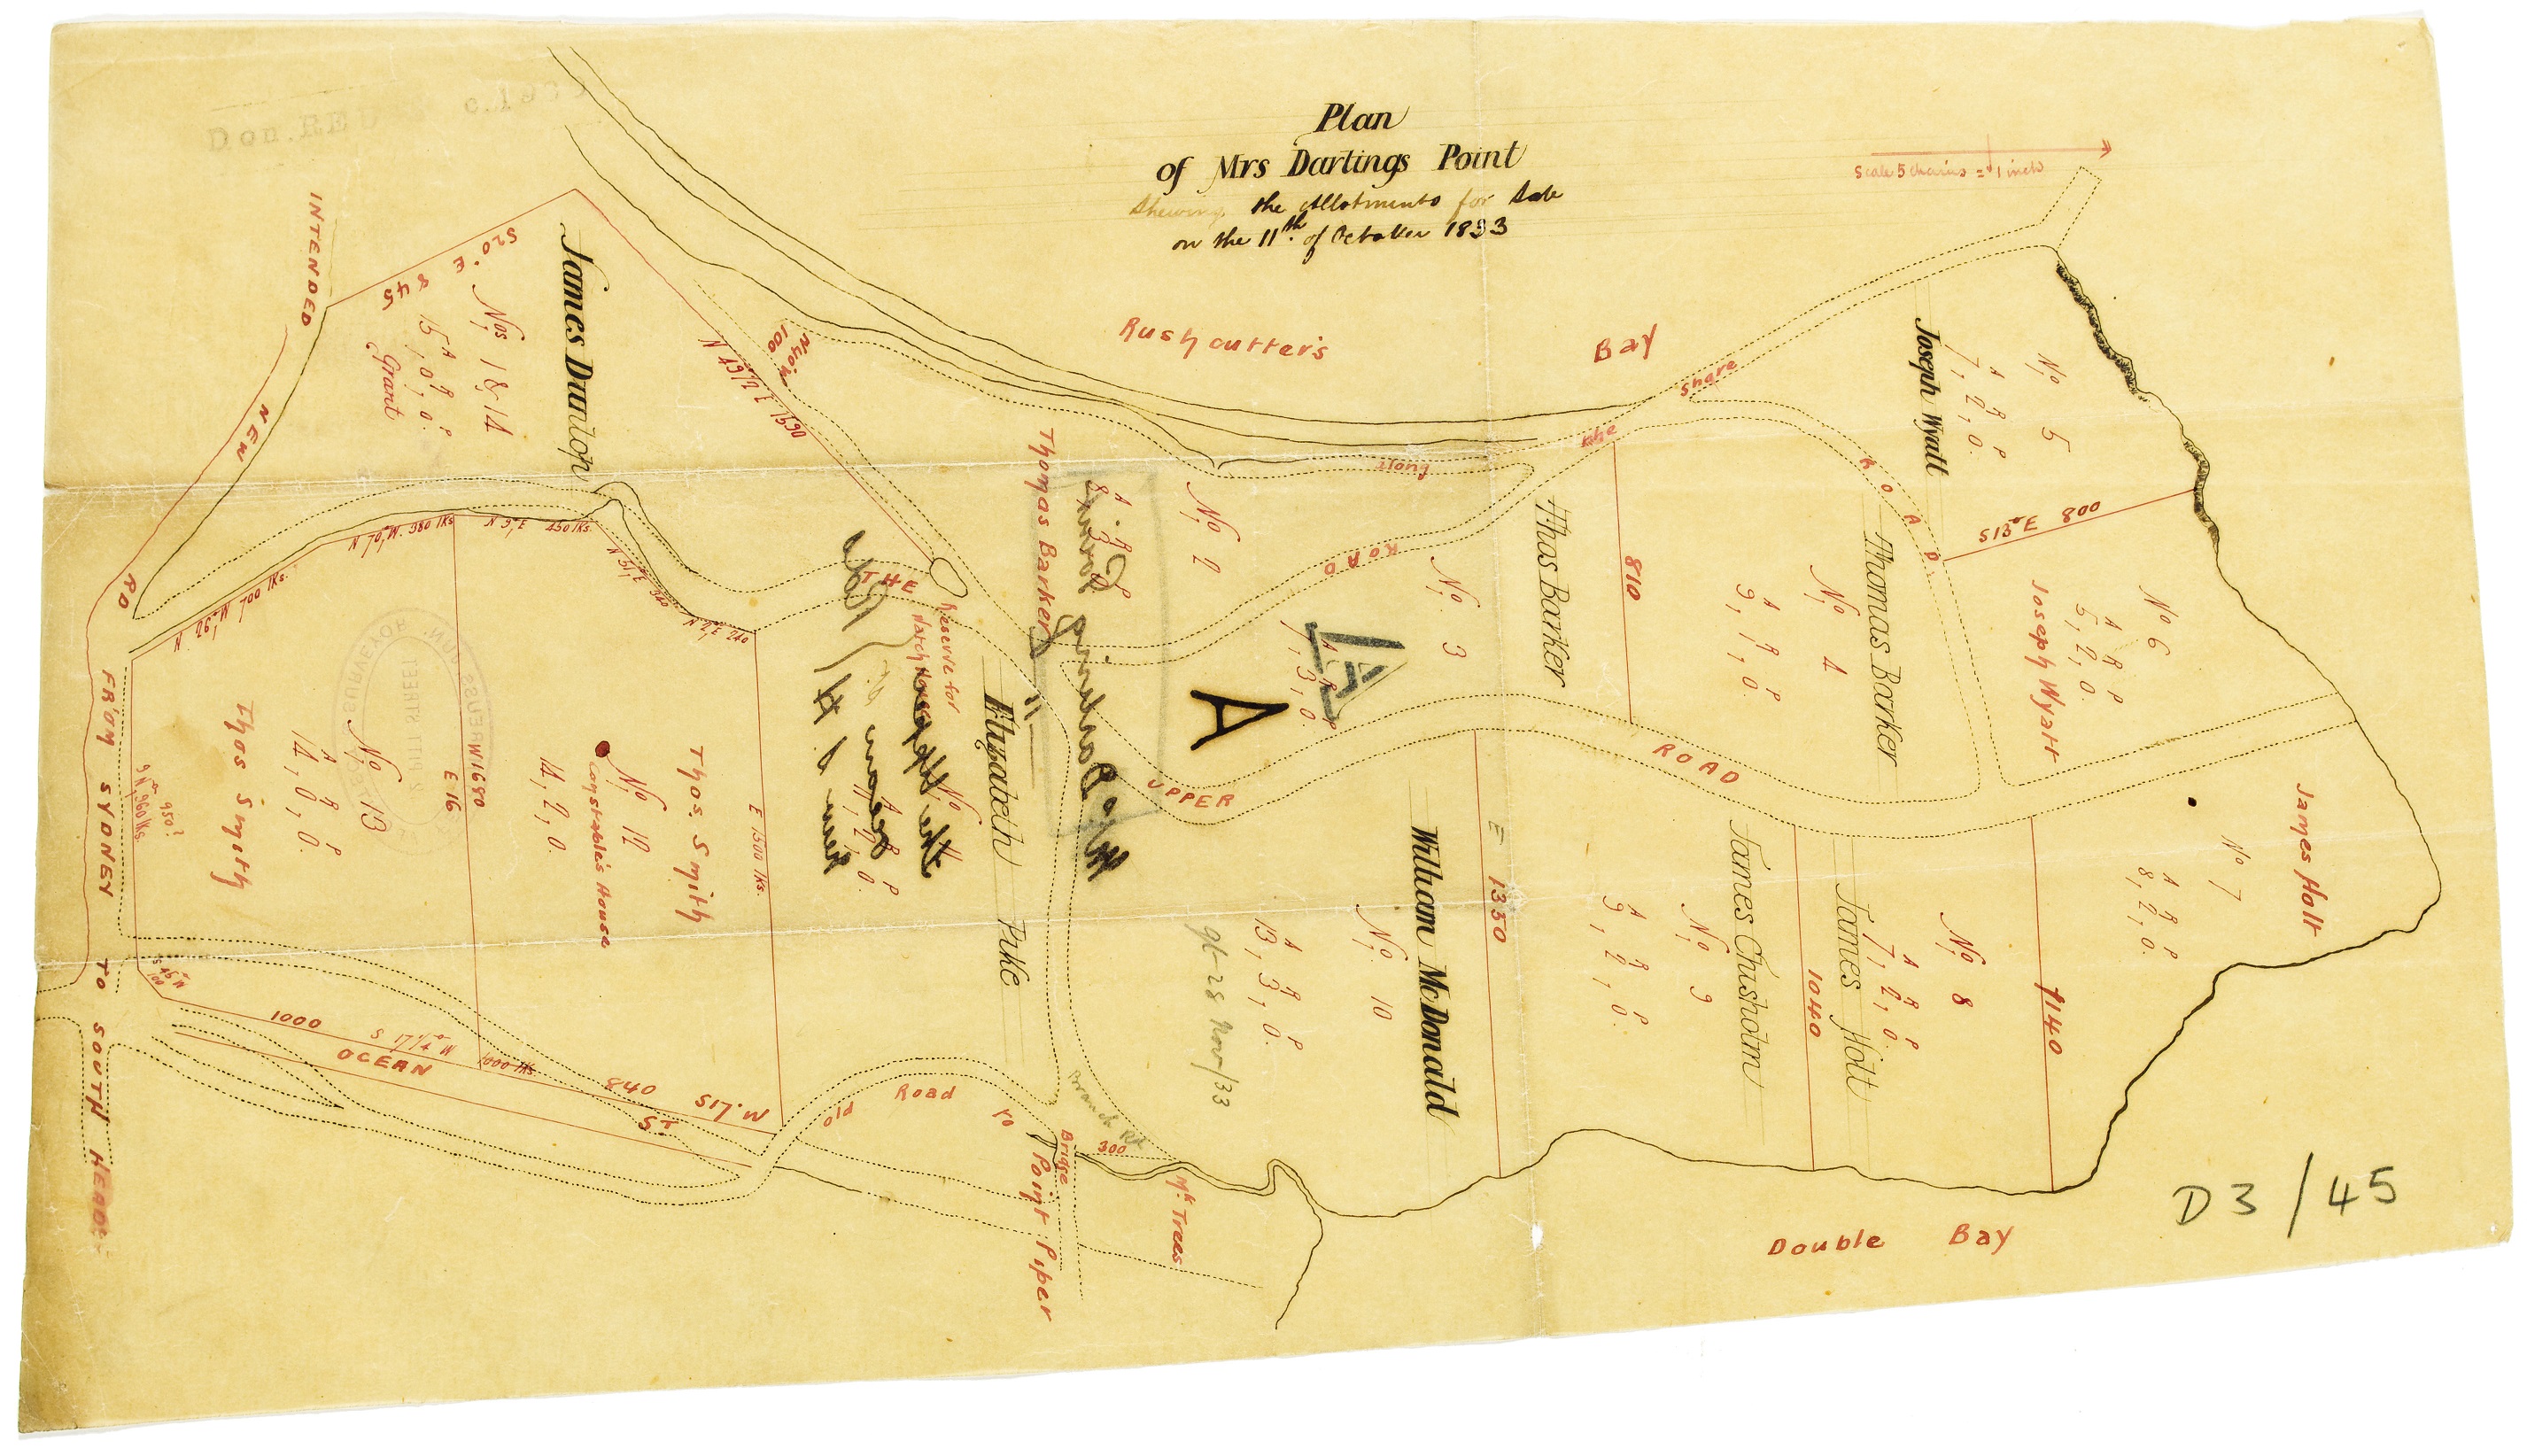 plan_for_mrs_darlings_point_shewing_the_allotments_for_sale.jpg